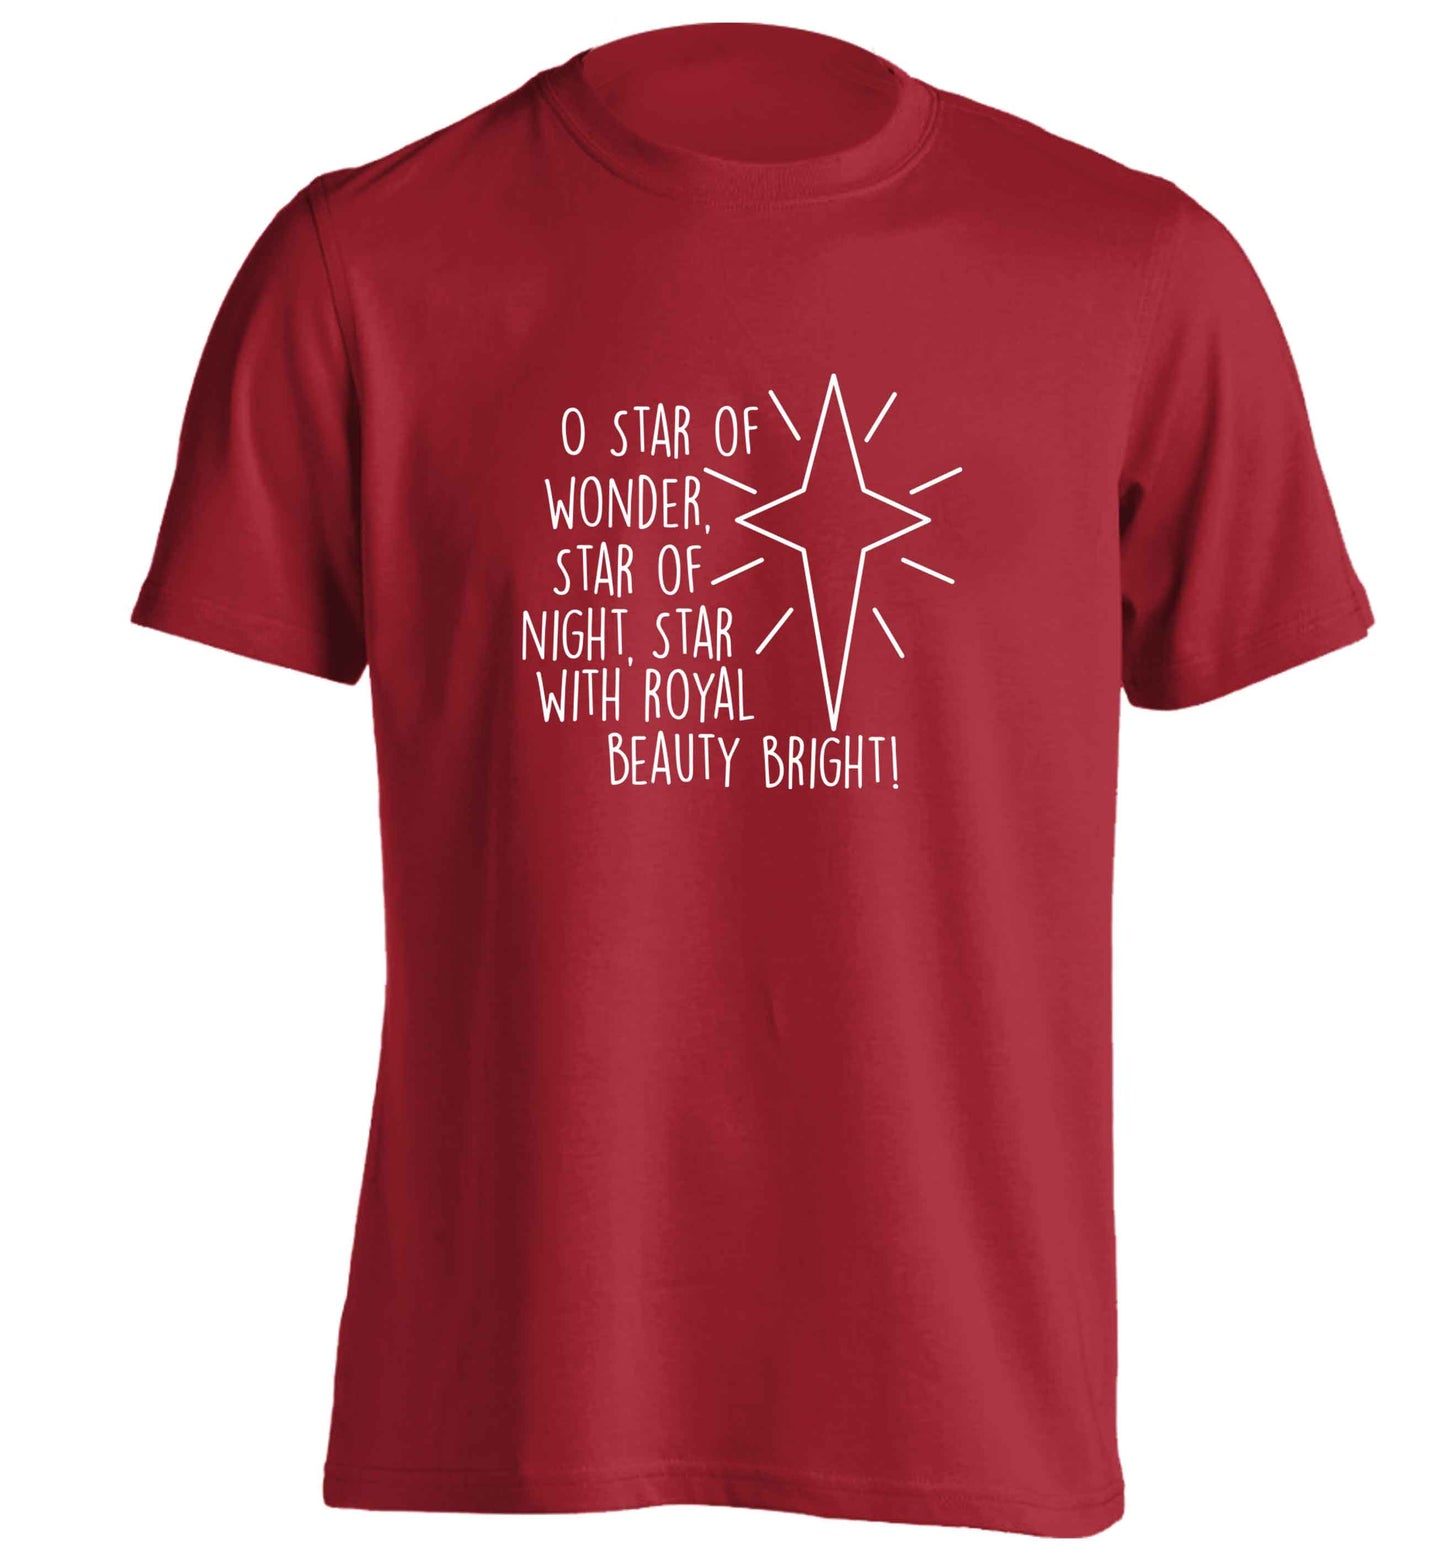 Oh star of wonder star of night, star with royal beauty bright adults unisex red Tshirt 2XL